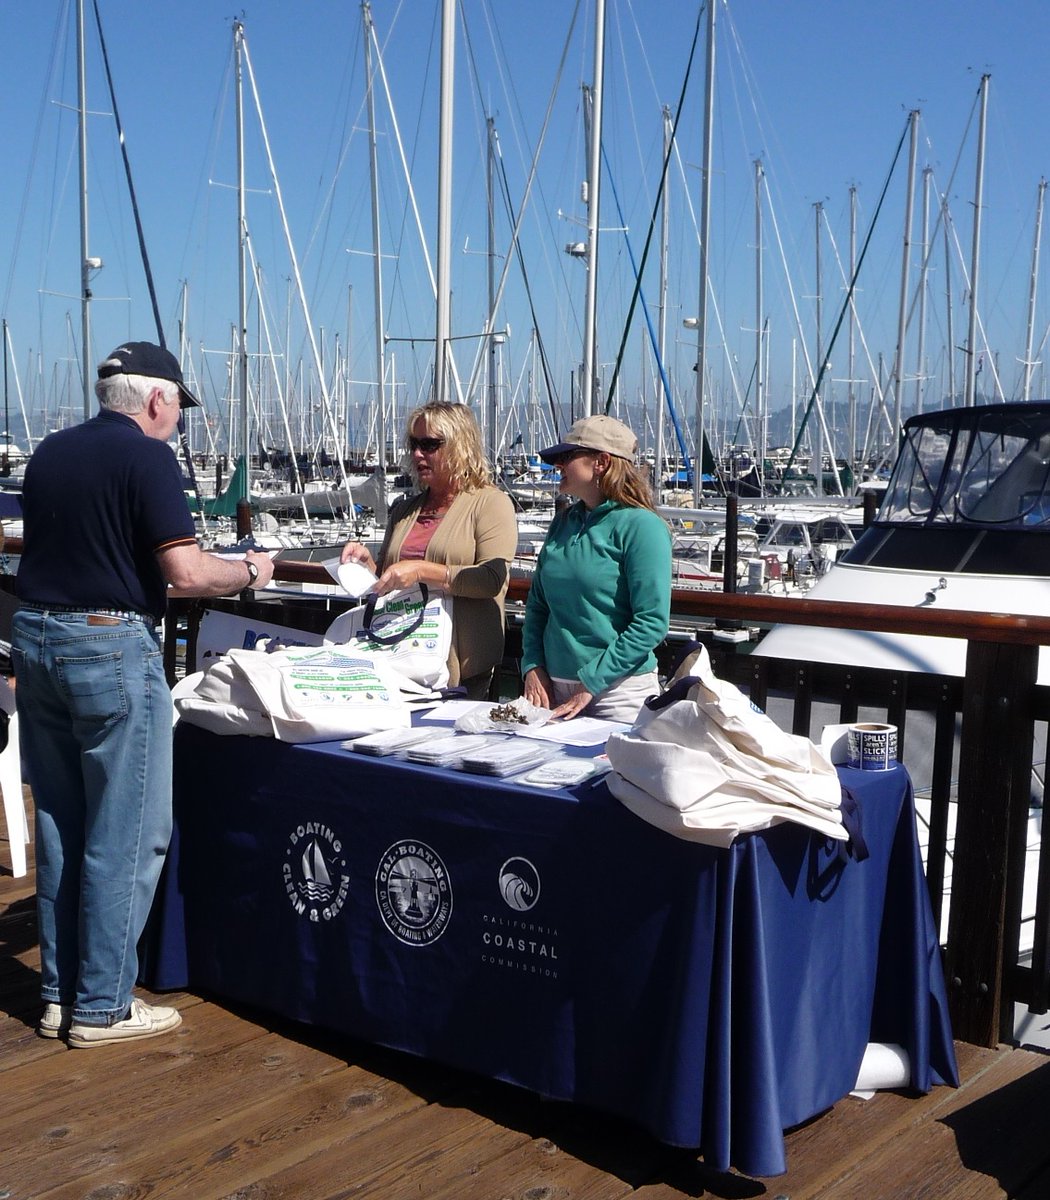 Want to make a difference and share clean and safe boating information with boaters? Register for our free NorCal Dockwalker in-person training at Oakland Yacht Club on April 20th @ 10AM docs.google.com/forms/d/e/1FAI…. @TheCACoast @SMBRF @USCGAux @uspsabc